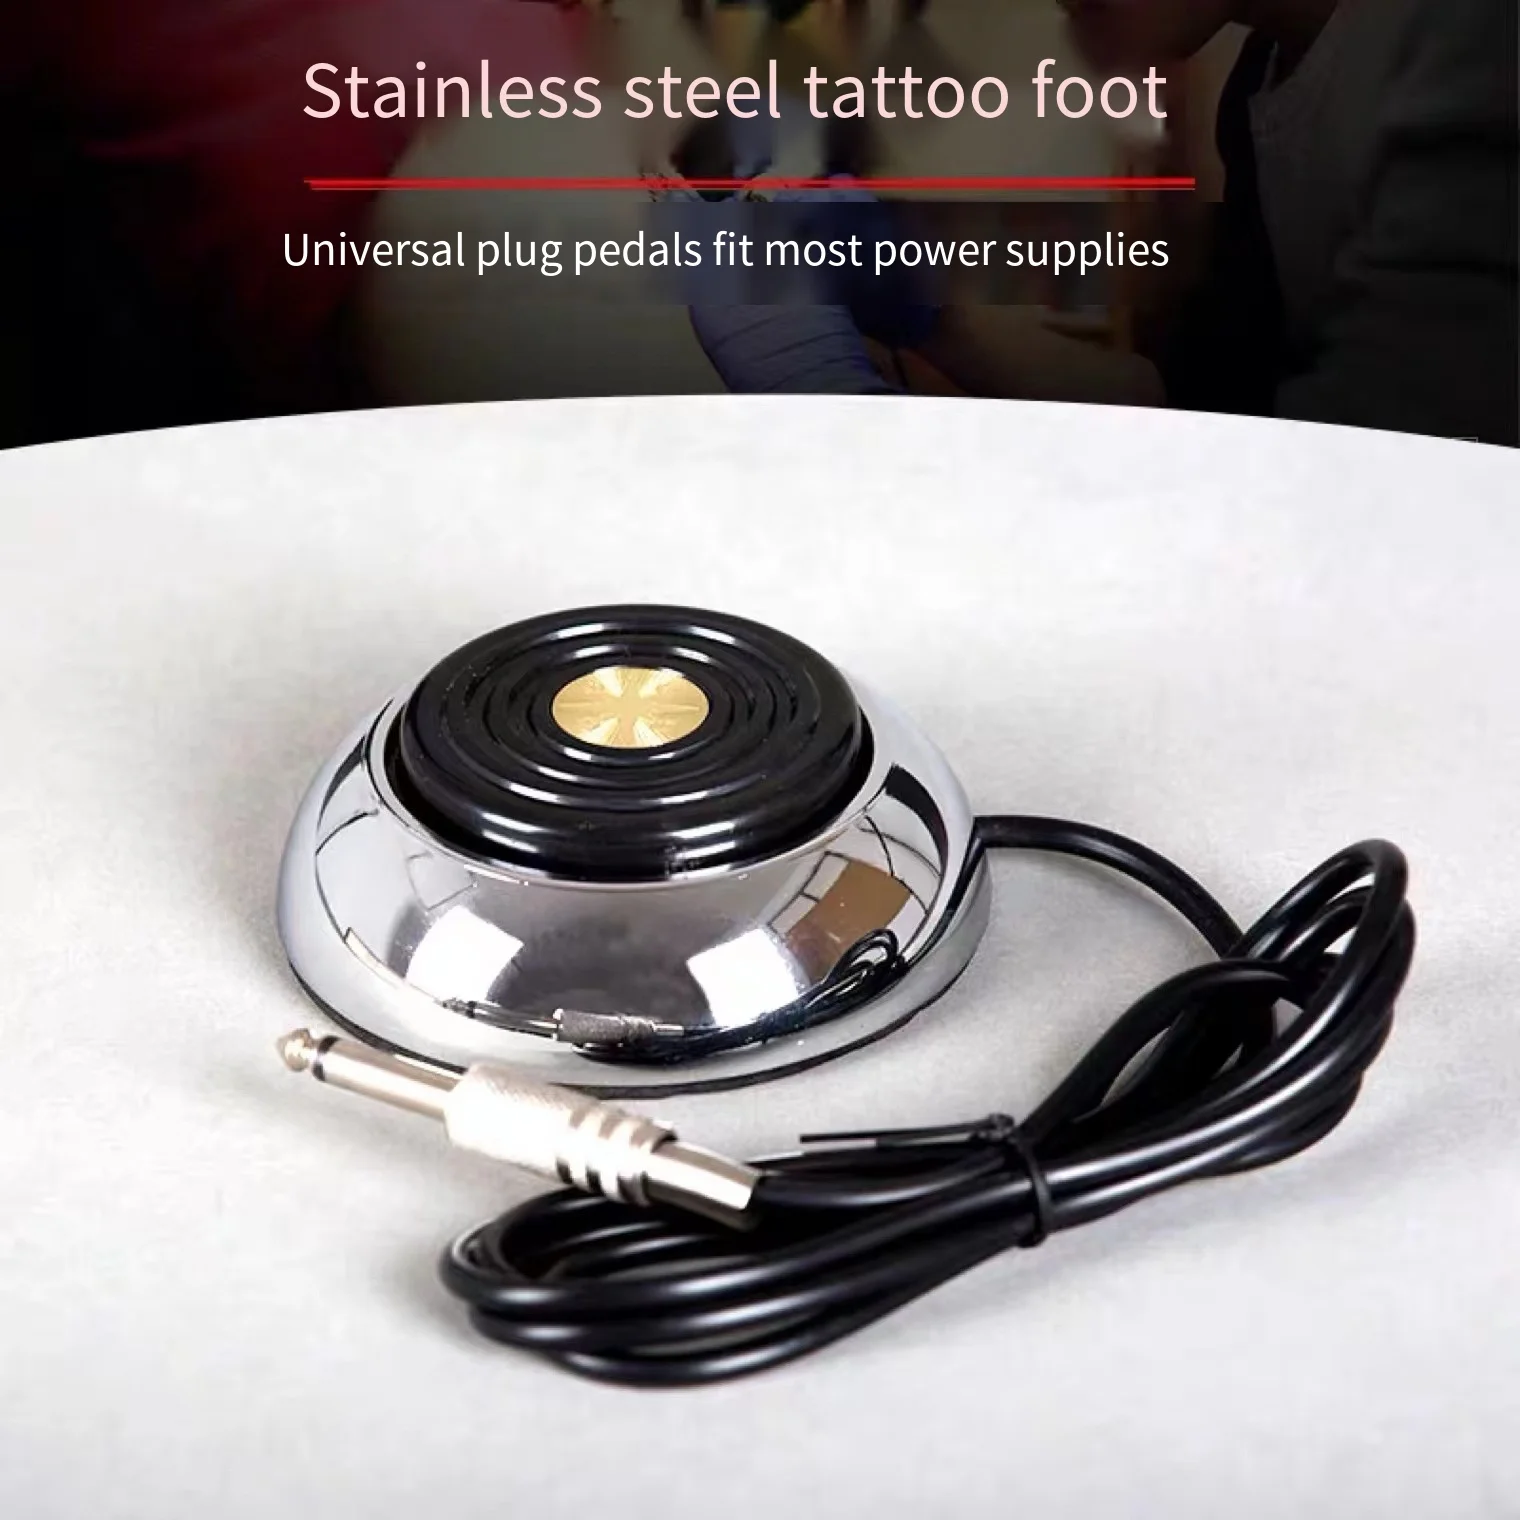 360° Tattoo Foot Pedal Multi-Angle Weighted Tattoo Machine Power Supply Pedal Switch Tattoo Equipment Voltage Regulator Makeup bs 737g cheap 18650 small spot weld machine microchip controlled 2 mode in 1 power saving pedal welder equipment for batteries